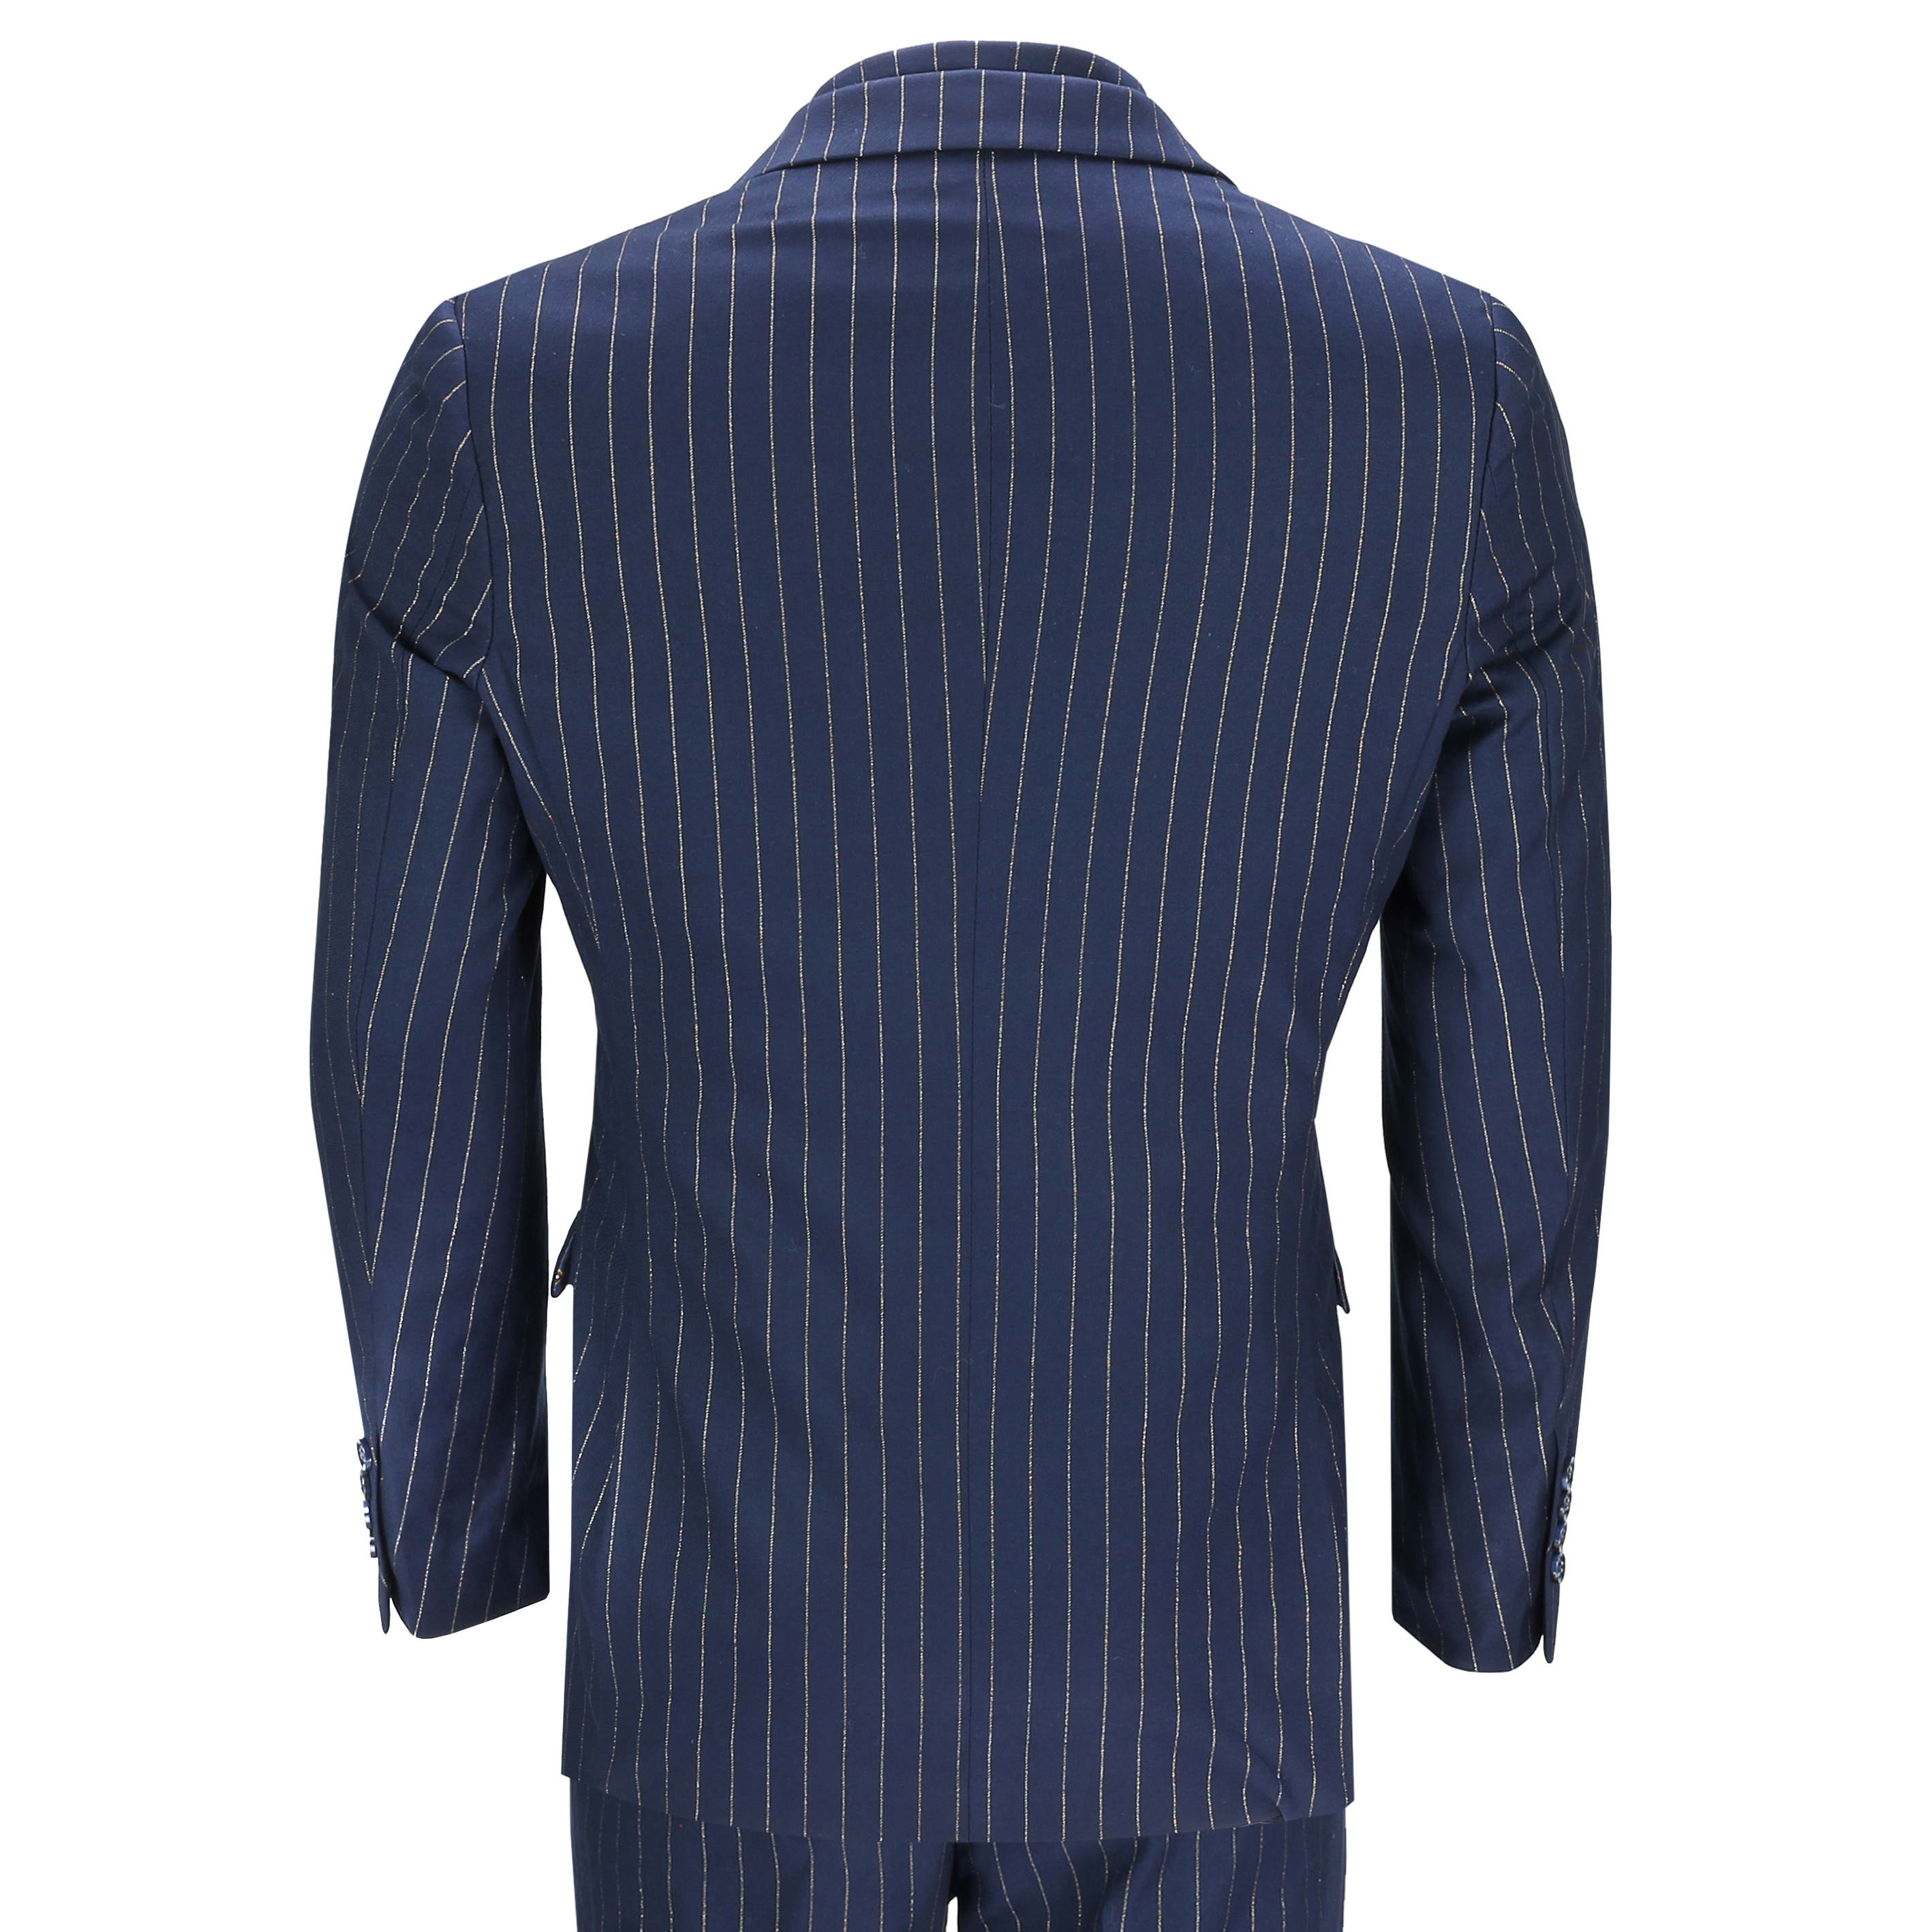 NEIL - NAVY DOUBLE BREASTED GOLD PINSTRIPE JACKET